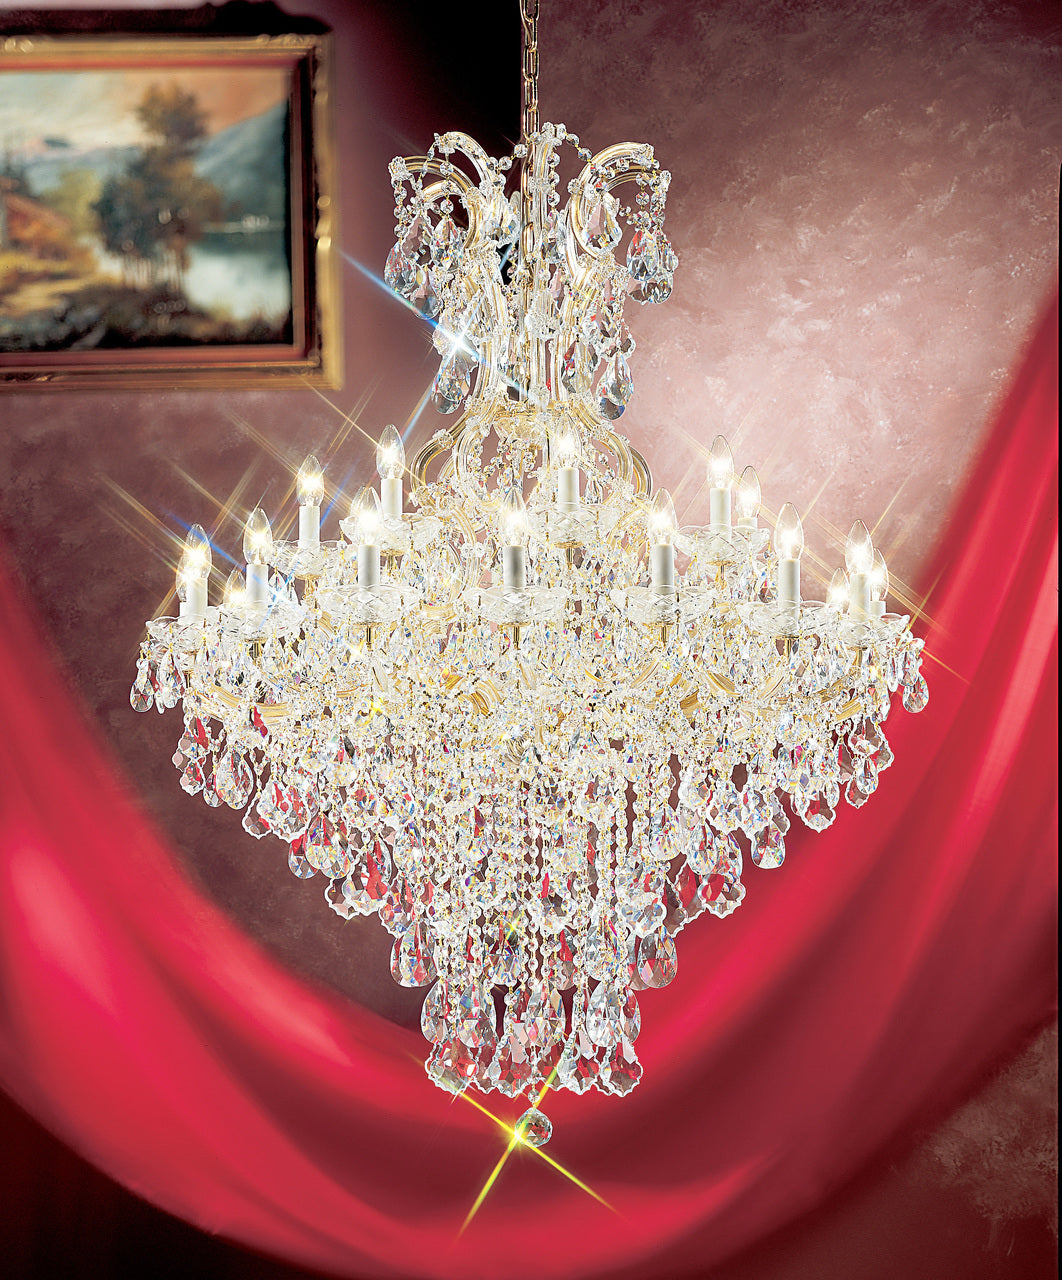 Classic Lighting 8179 OWG C Maria Theresa Traditional Crystal Chandelier in Olde World Gold (Imported from Italy)